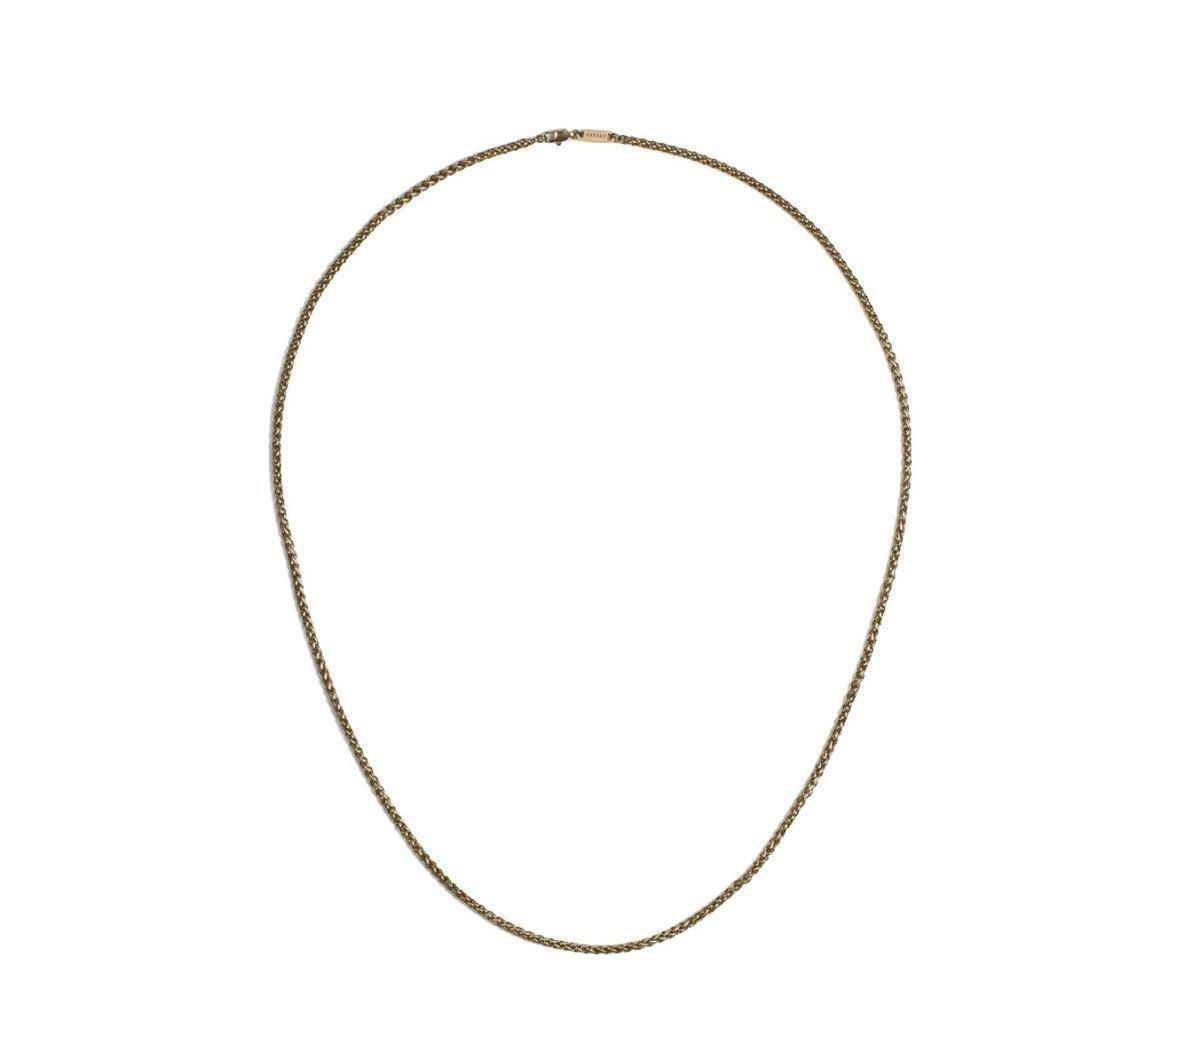 VITALY Wheat Chain Gold Necklace - SUPERCONSCIOUS BERLIN